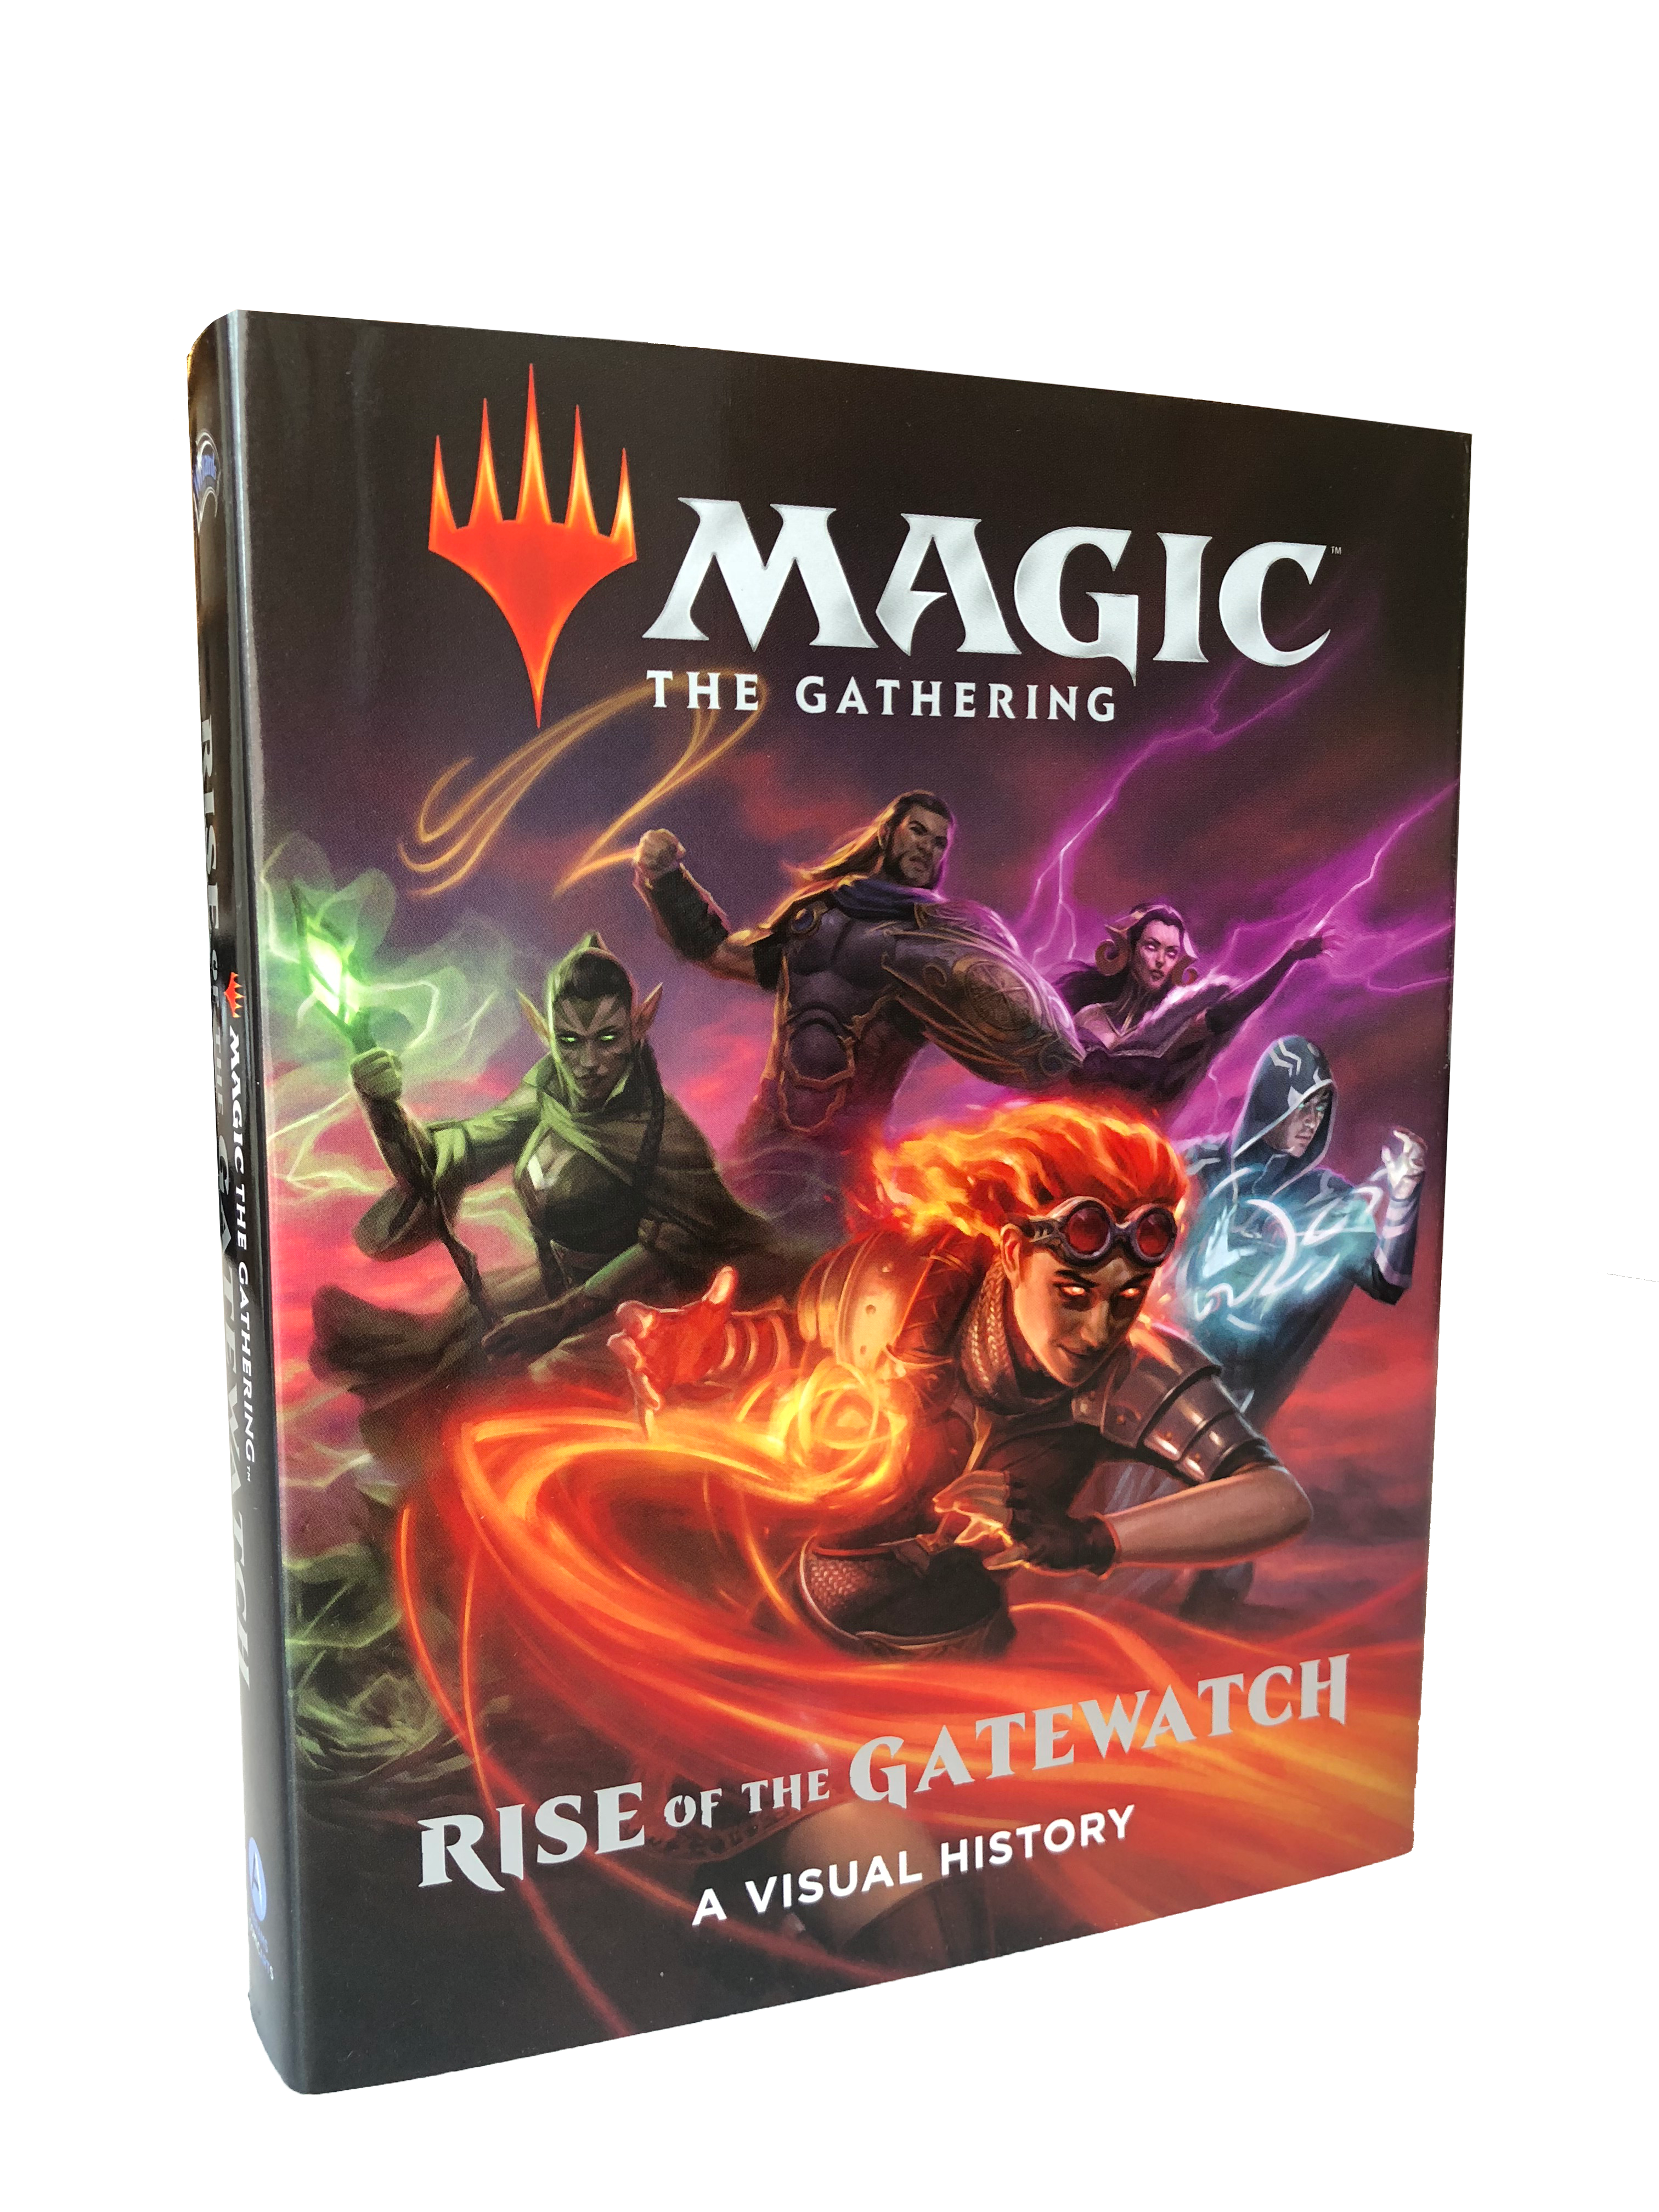 Abrams ComicArts SDCC 2019 Exclusive: Magic: The Gathering: Rise of the Gatewatch